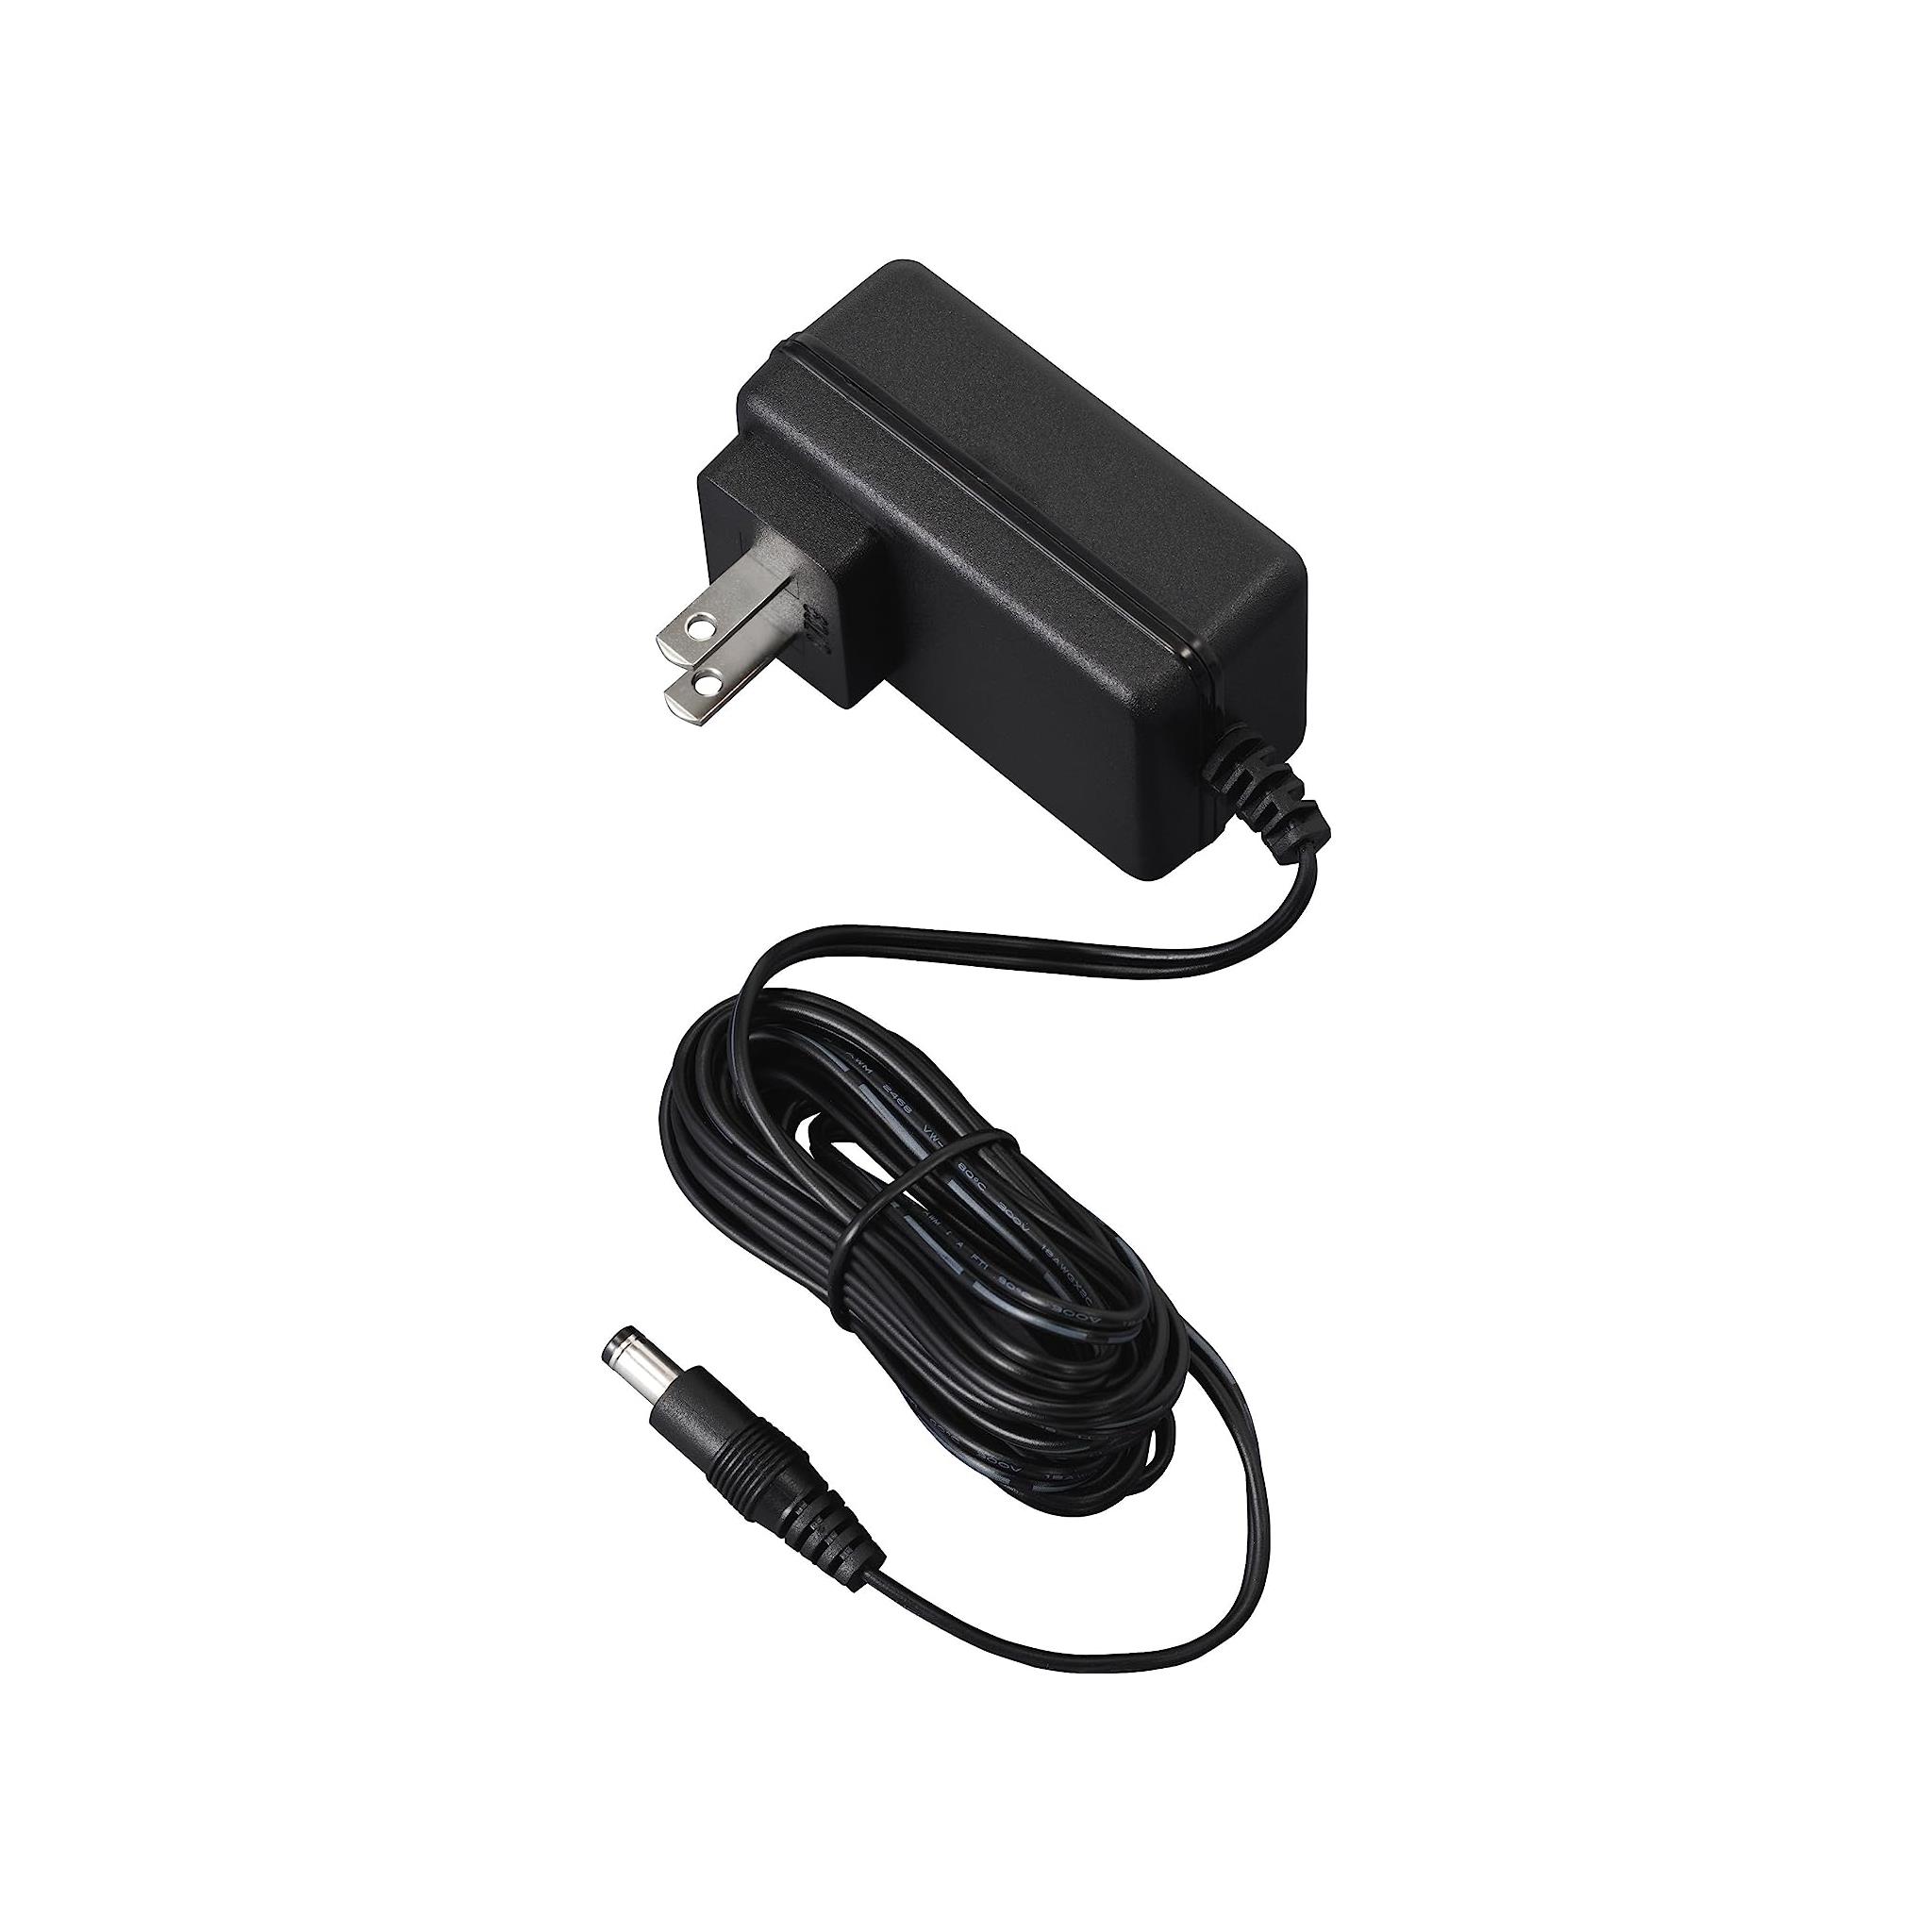 Yamaha Power Adapter for Portable Keyboards